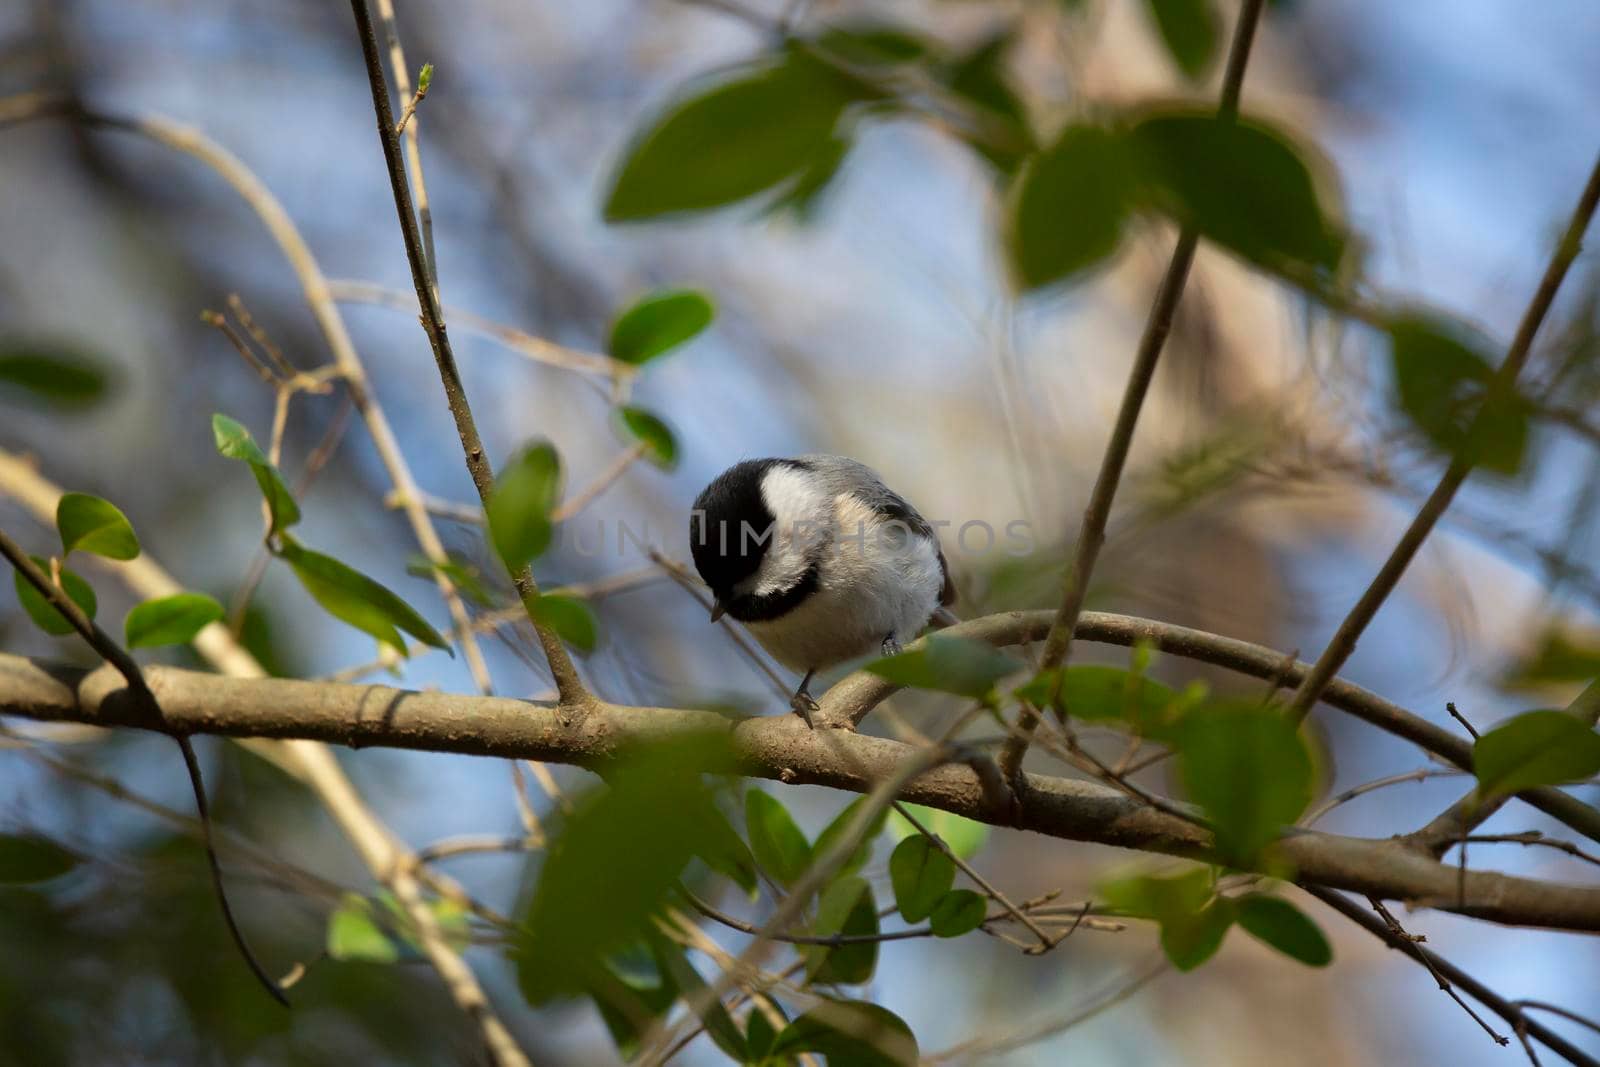 Black-capped chickadee (Poecile atricapillus) looking down from its perch on a bush